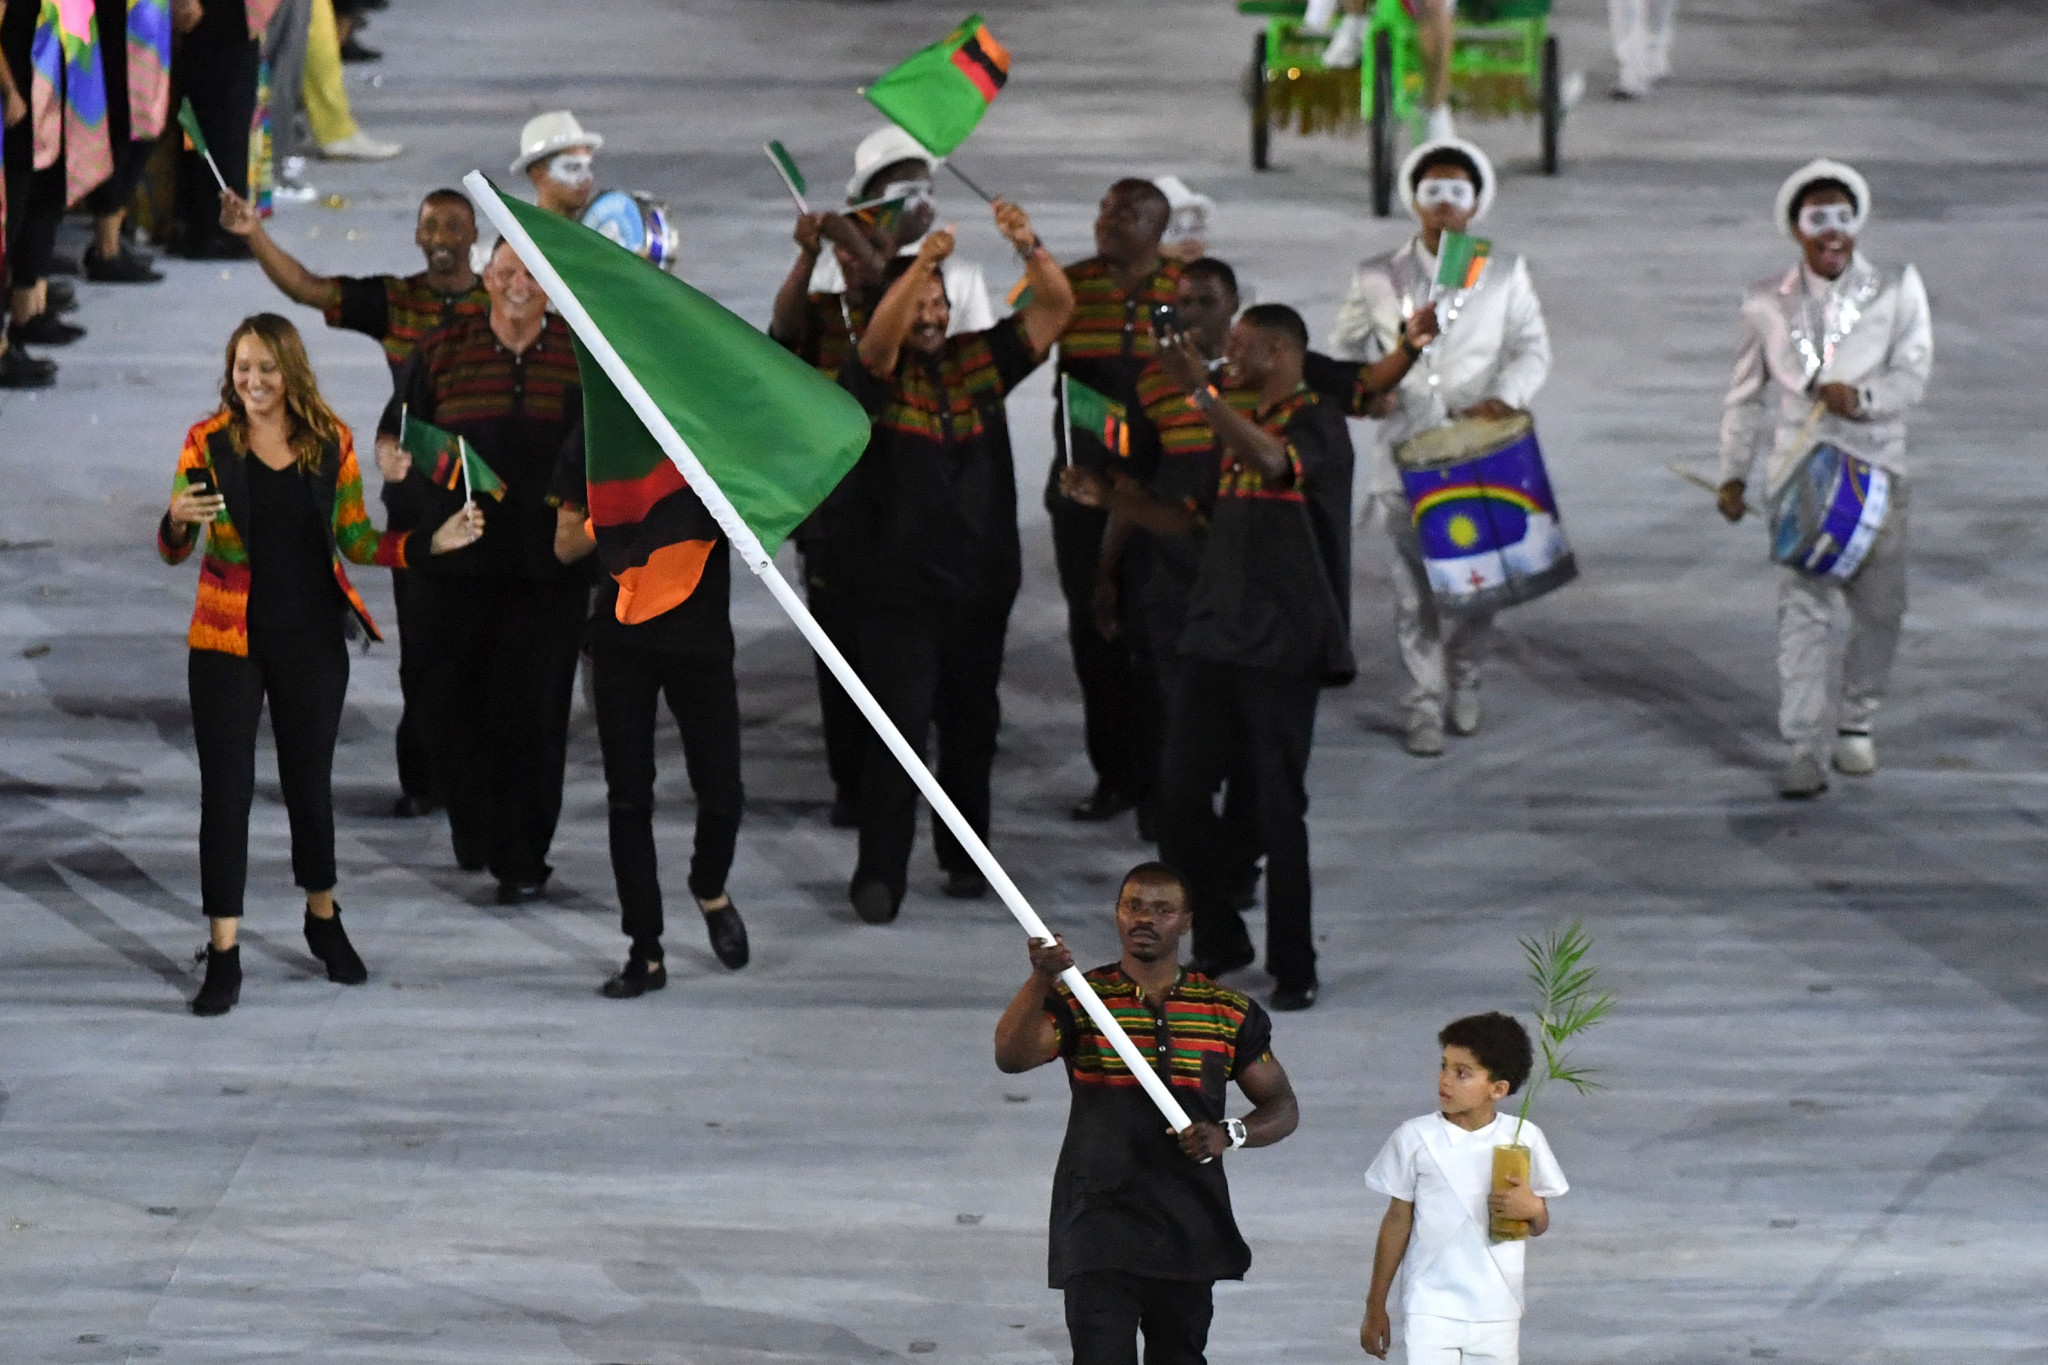 Zambia sent seven athletes to the 2016 Olympic Games in Rio de Janeiro ©Getty Images